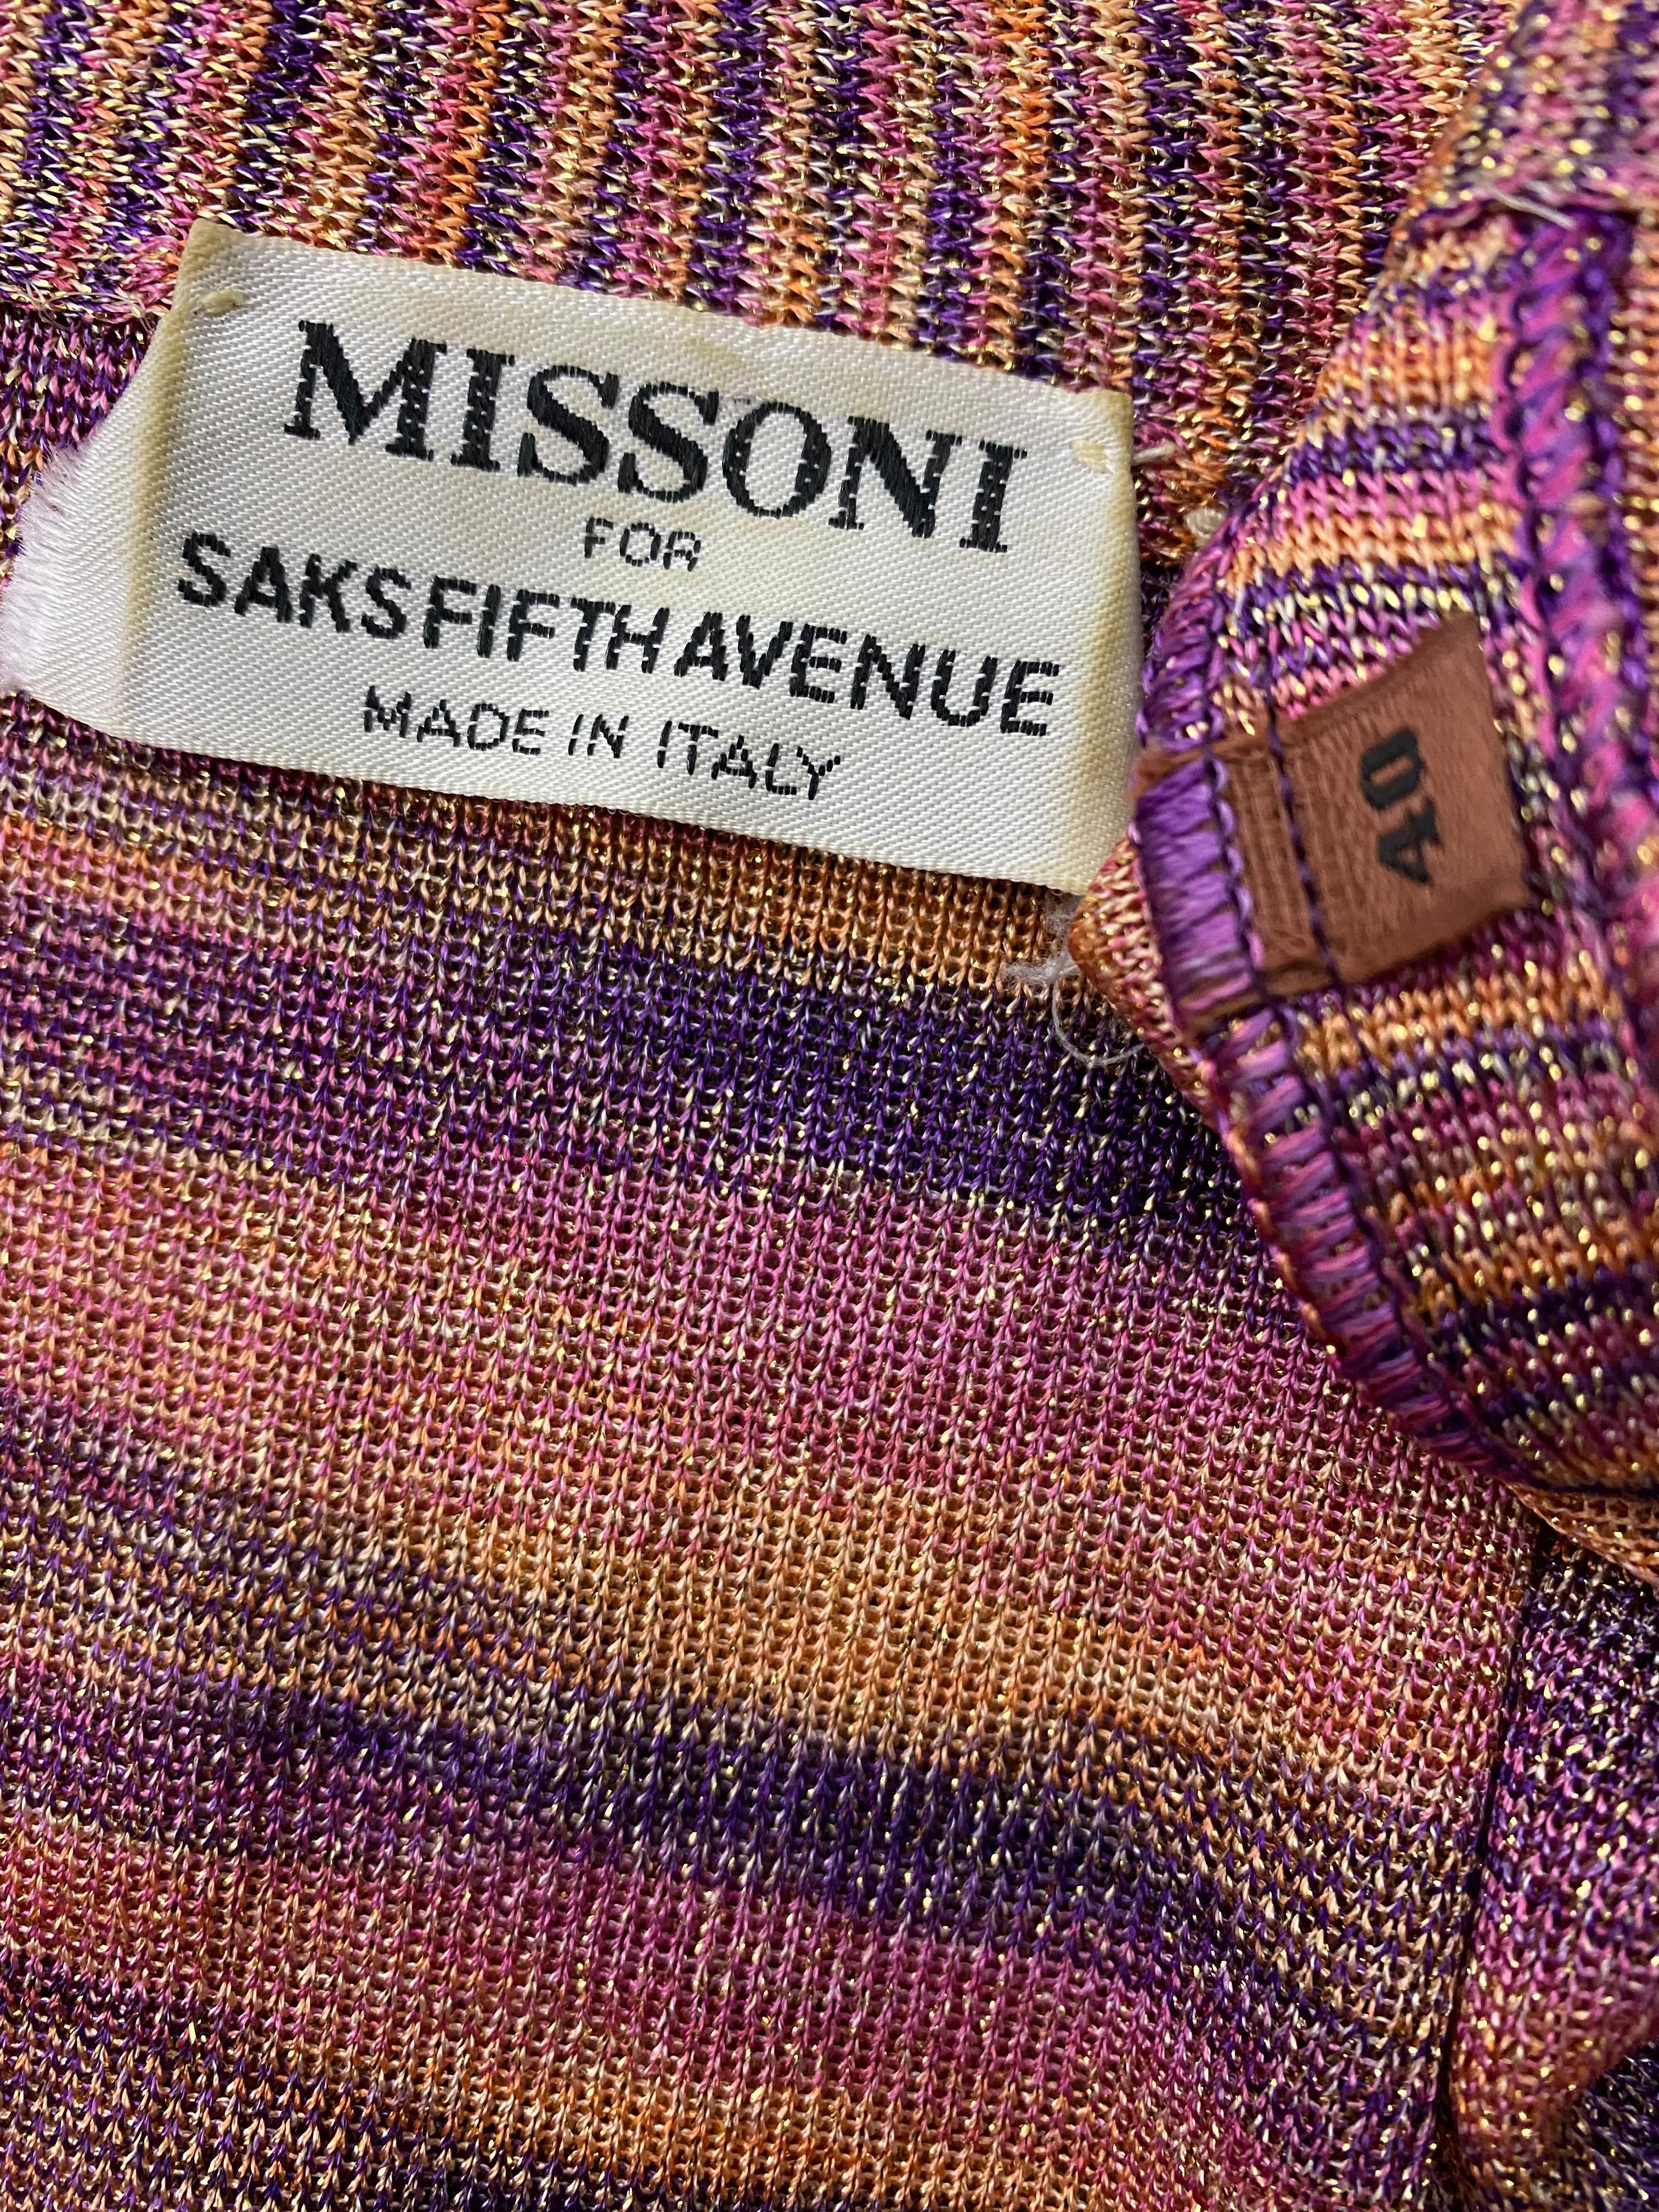 Missoni Multicolor Knit Sleeveless Top and Cardigan Set Size 40 For Sale 2